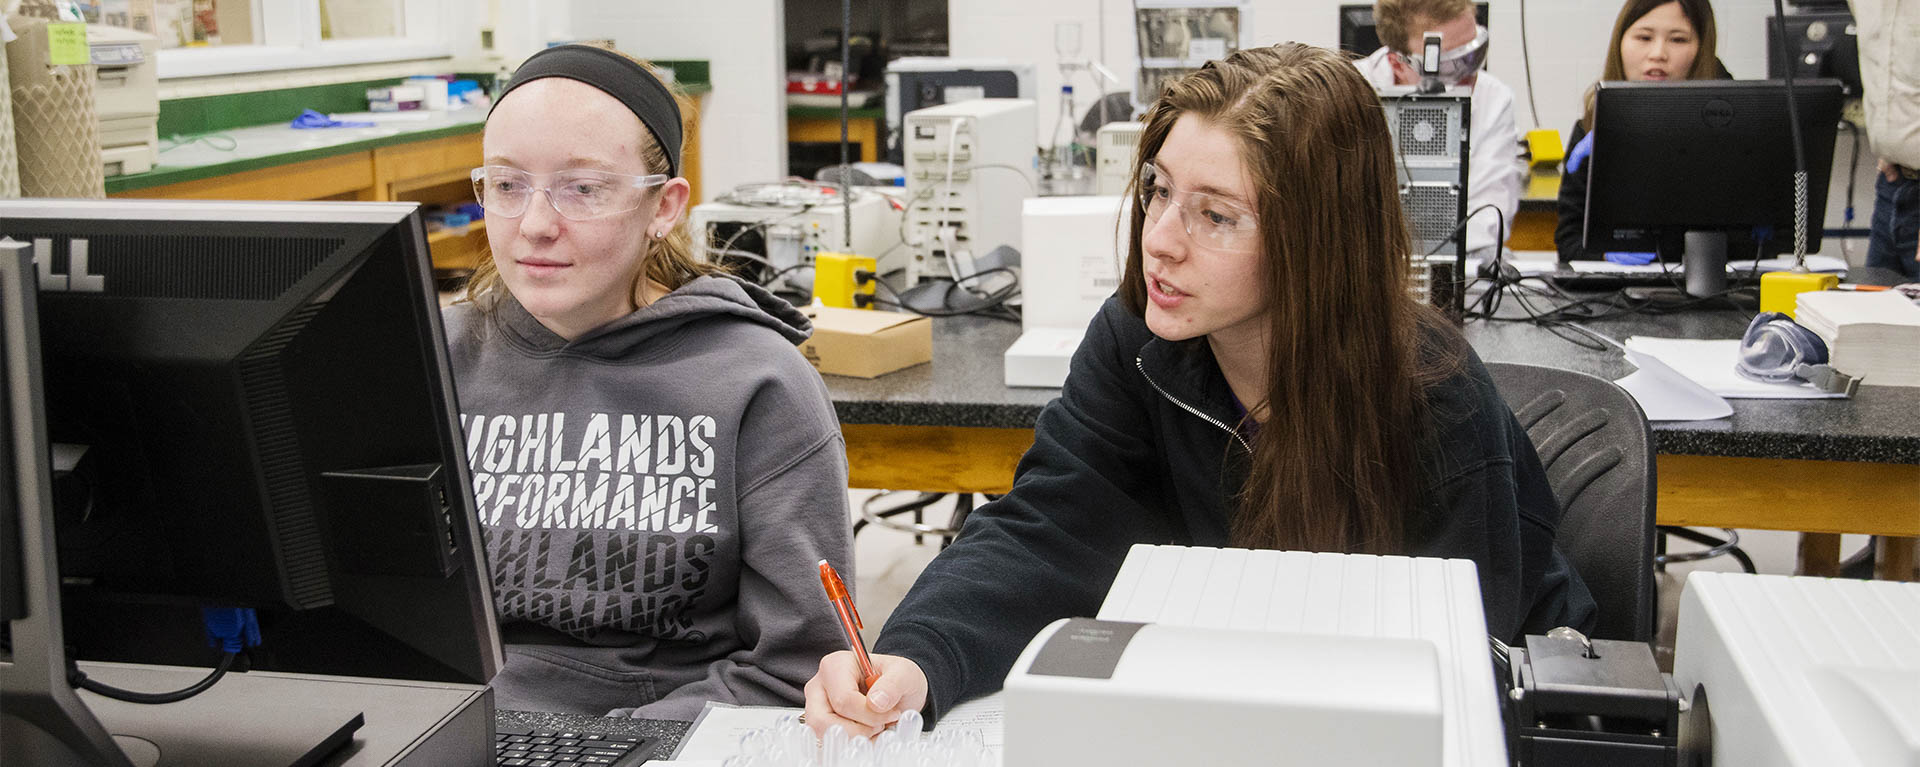 Biochemistry students work on a lab with the help of a professor.